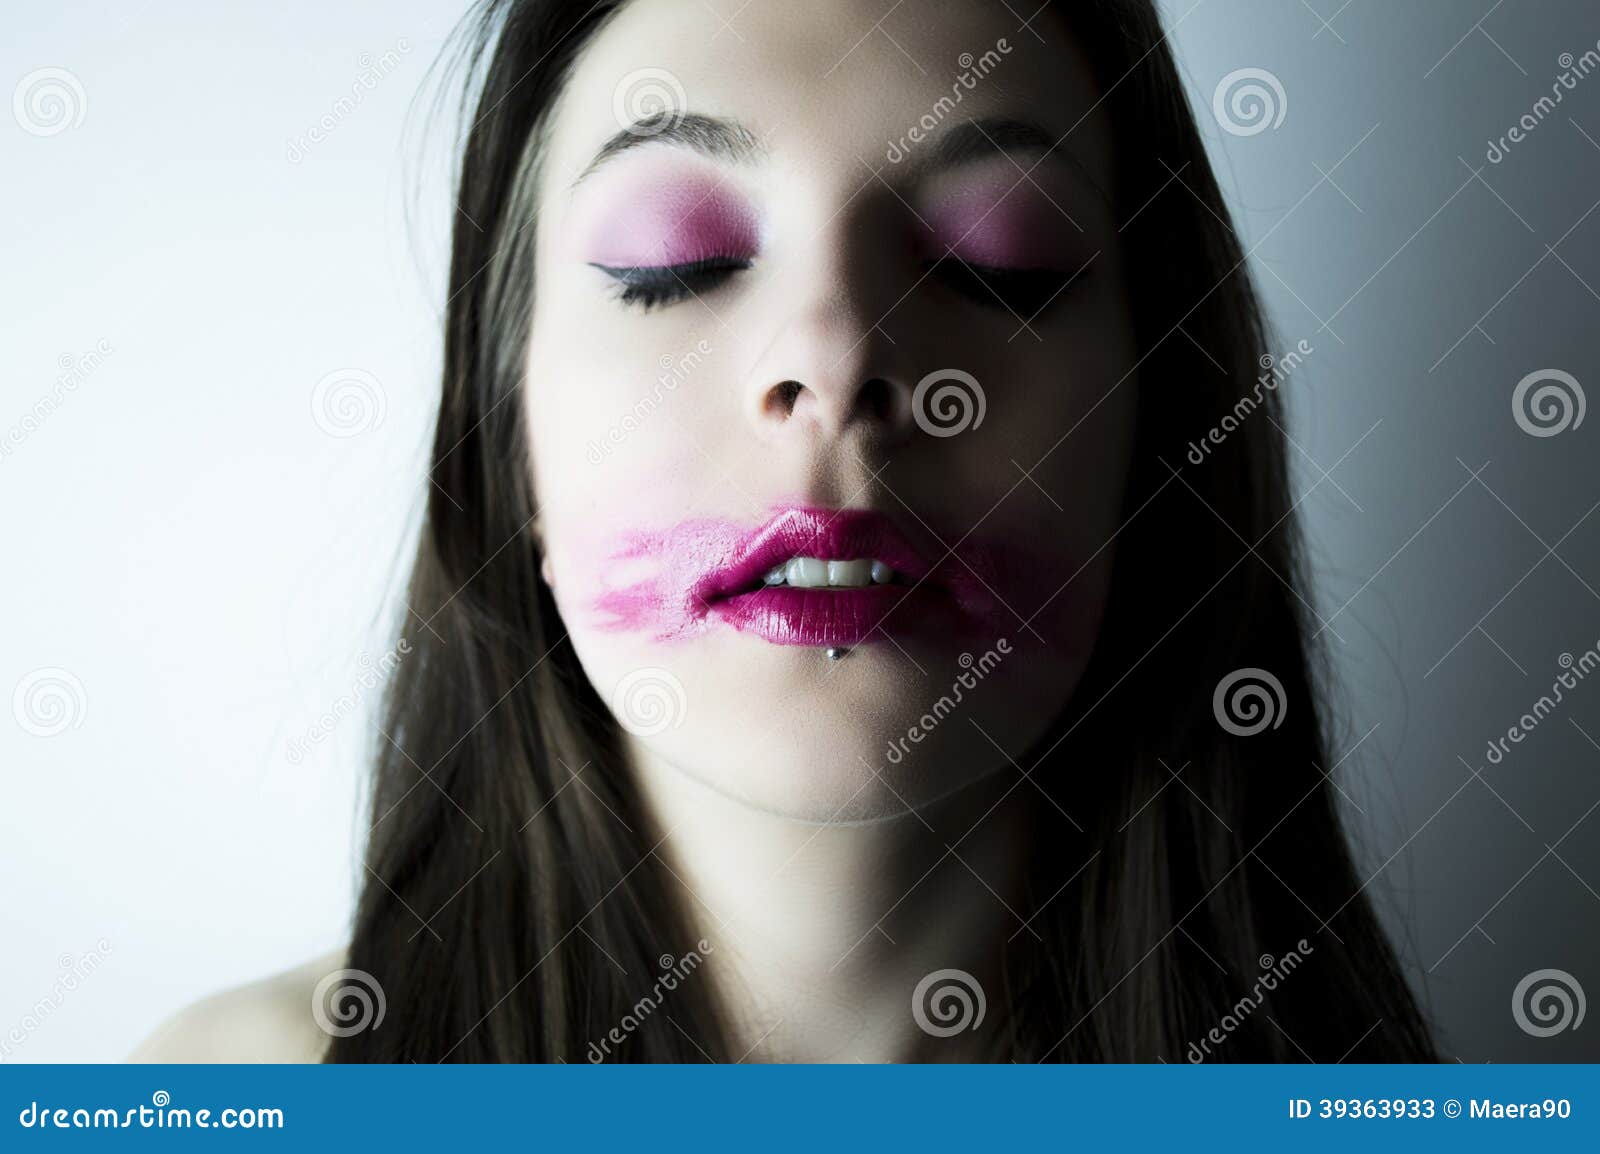 Messed Up Make Up Stock Image Image Of Woman Teeth 39363933